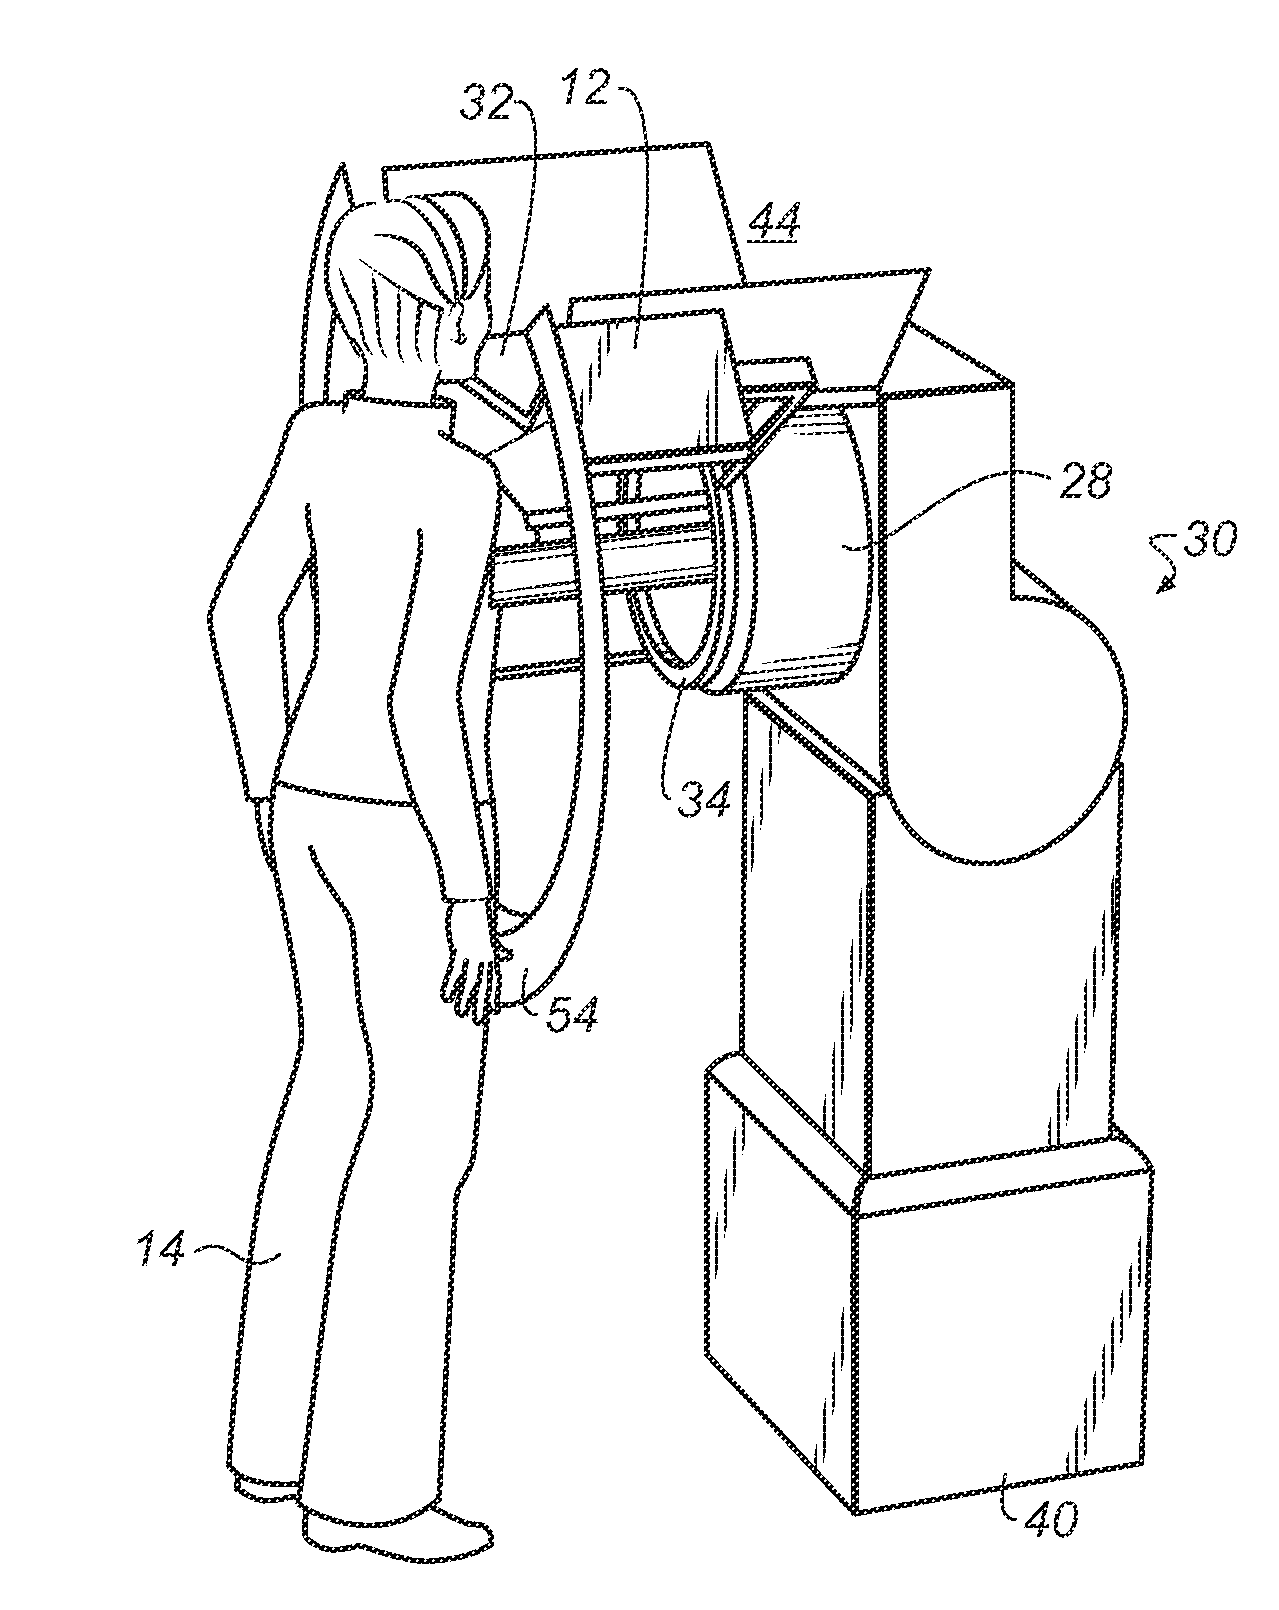 Apparatus and method for breast imaging